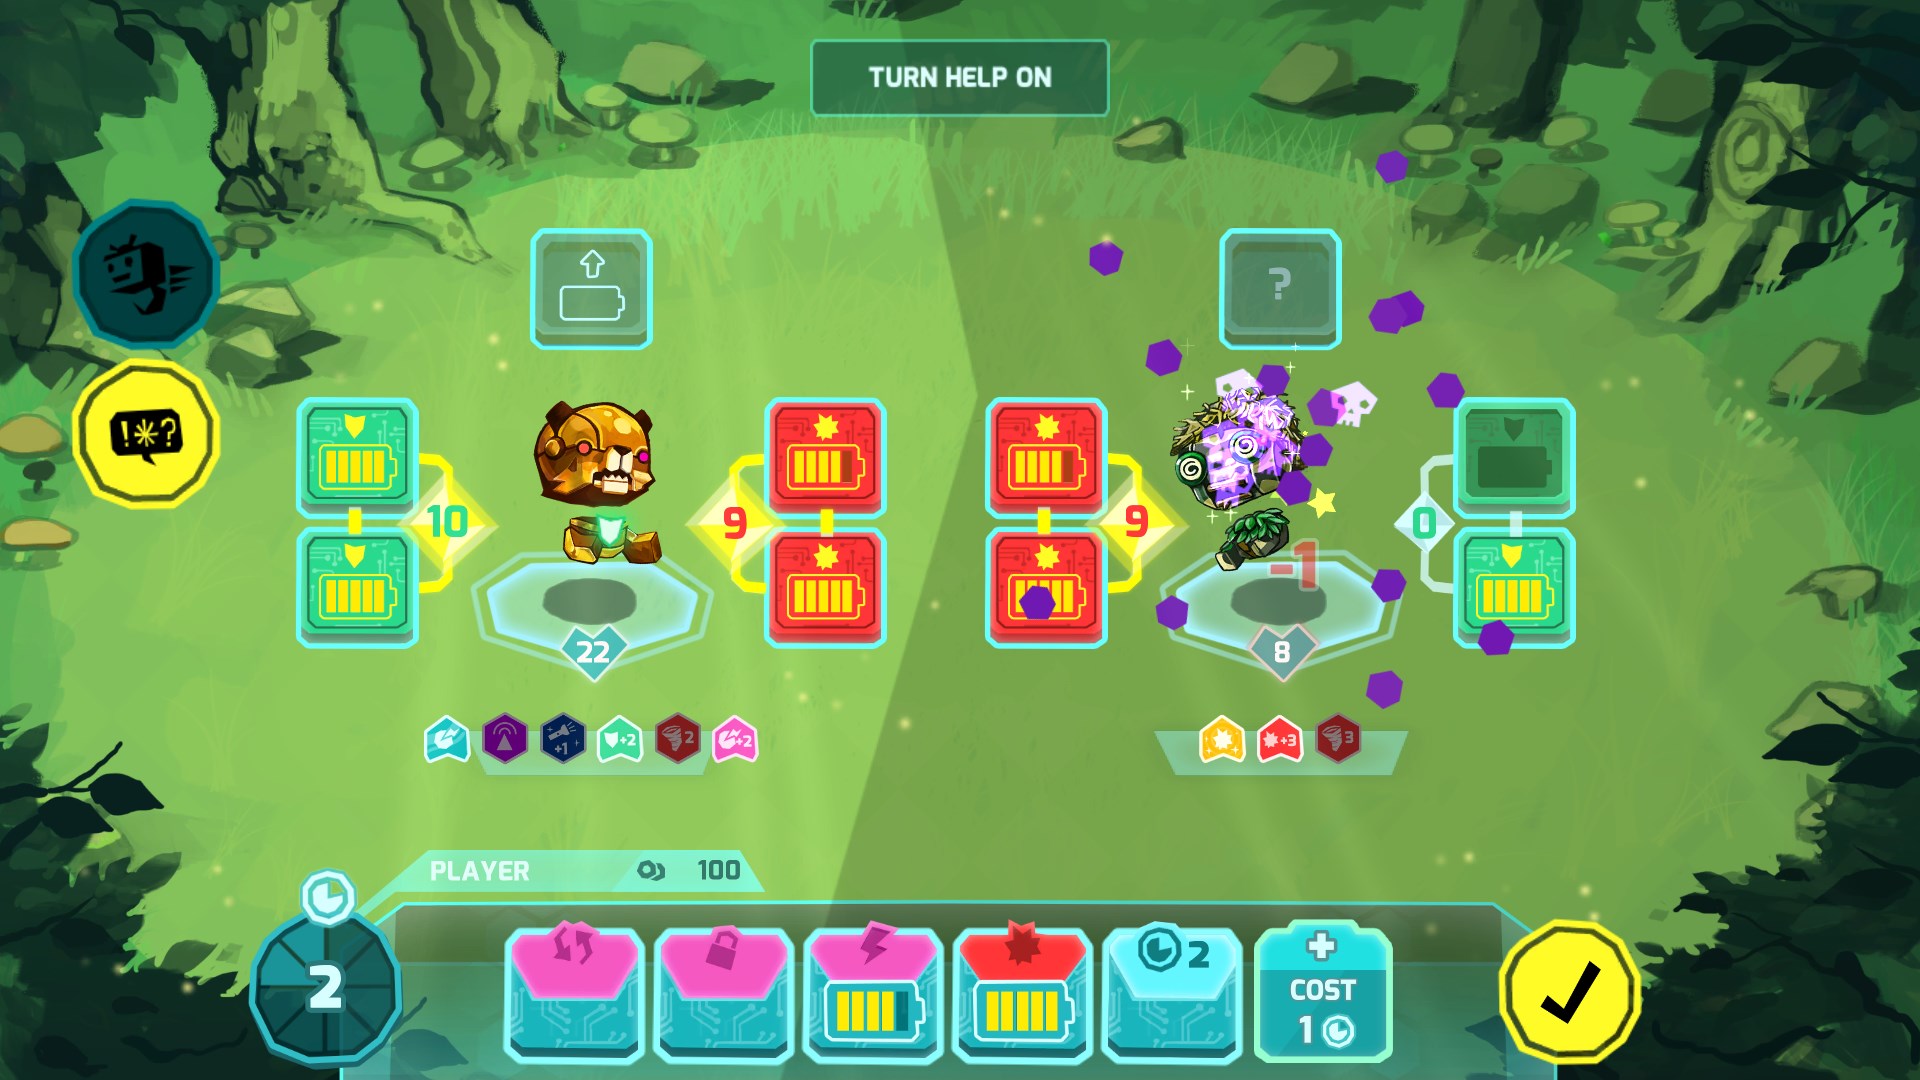 A bear robot has launched an attack on one decorated with leaves, inflicting a haze of disorienting purple pixels upon it. The player's hand of additional cards lines the bottom of the screen.